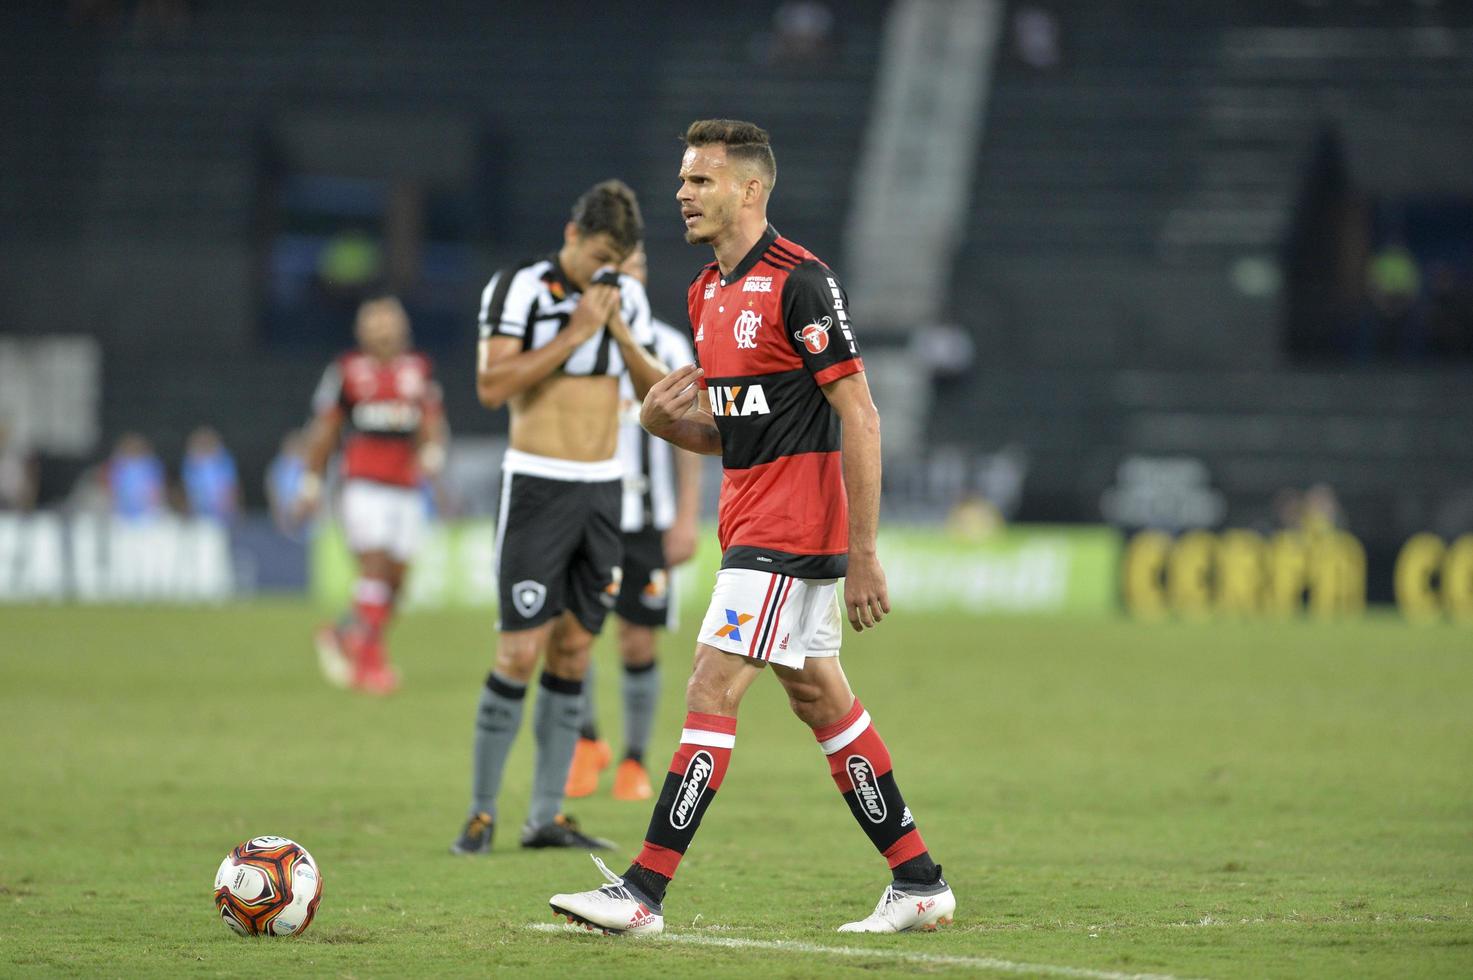 Rio, Brazil - march 03, 2018 -  Rene player in match between Flamengo and Botafogo by the Carioca Championship in Nilton Santos Stadium photo